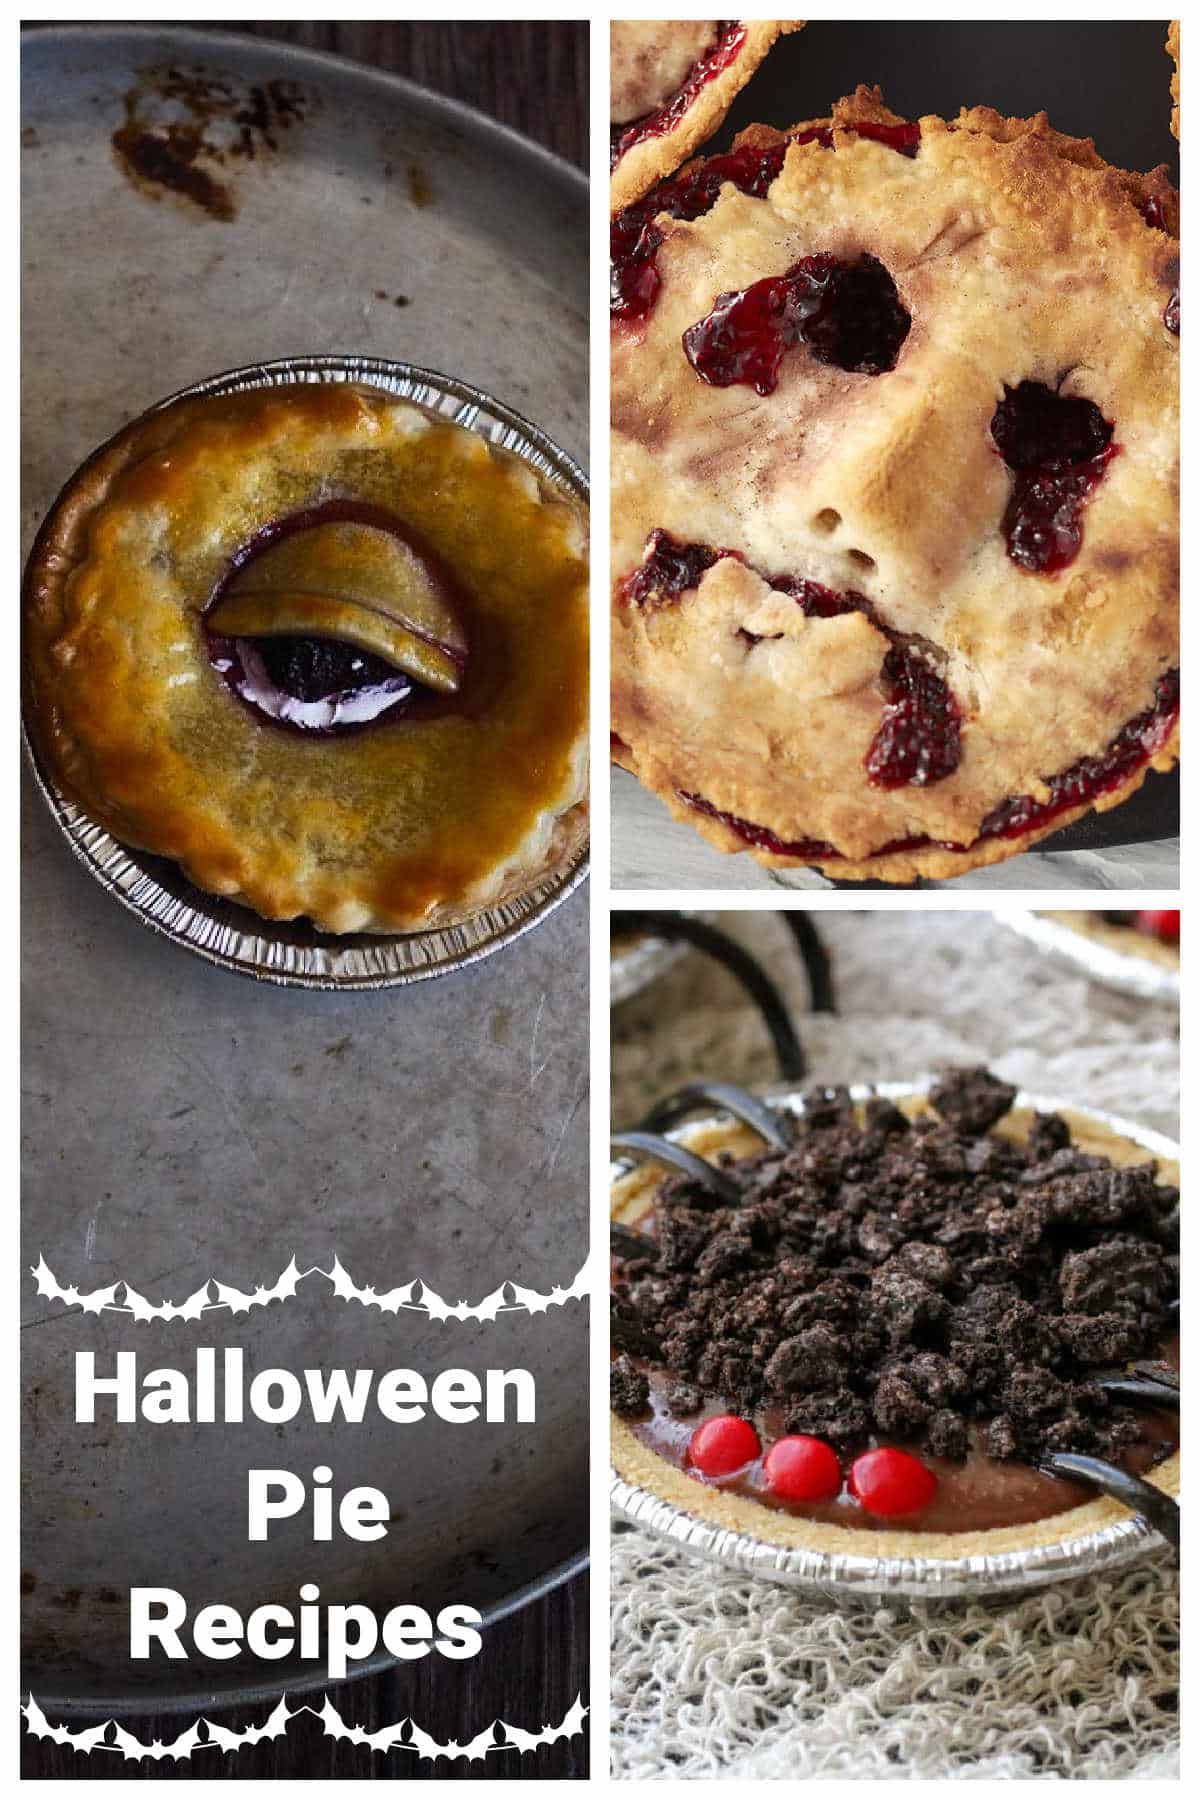 A collage of three images, showing halloween pies.